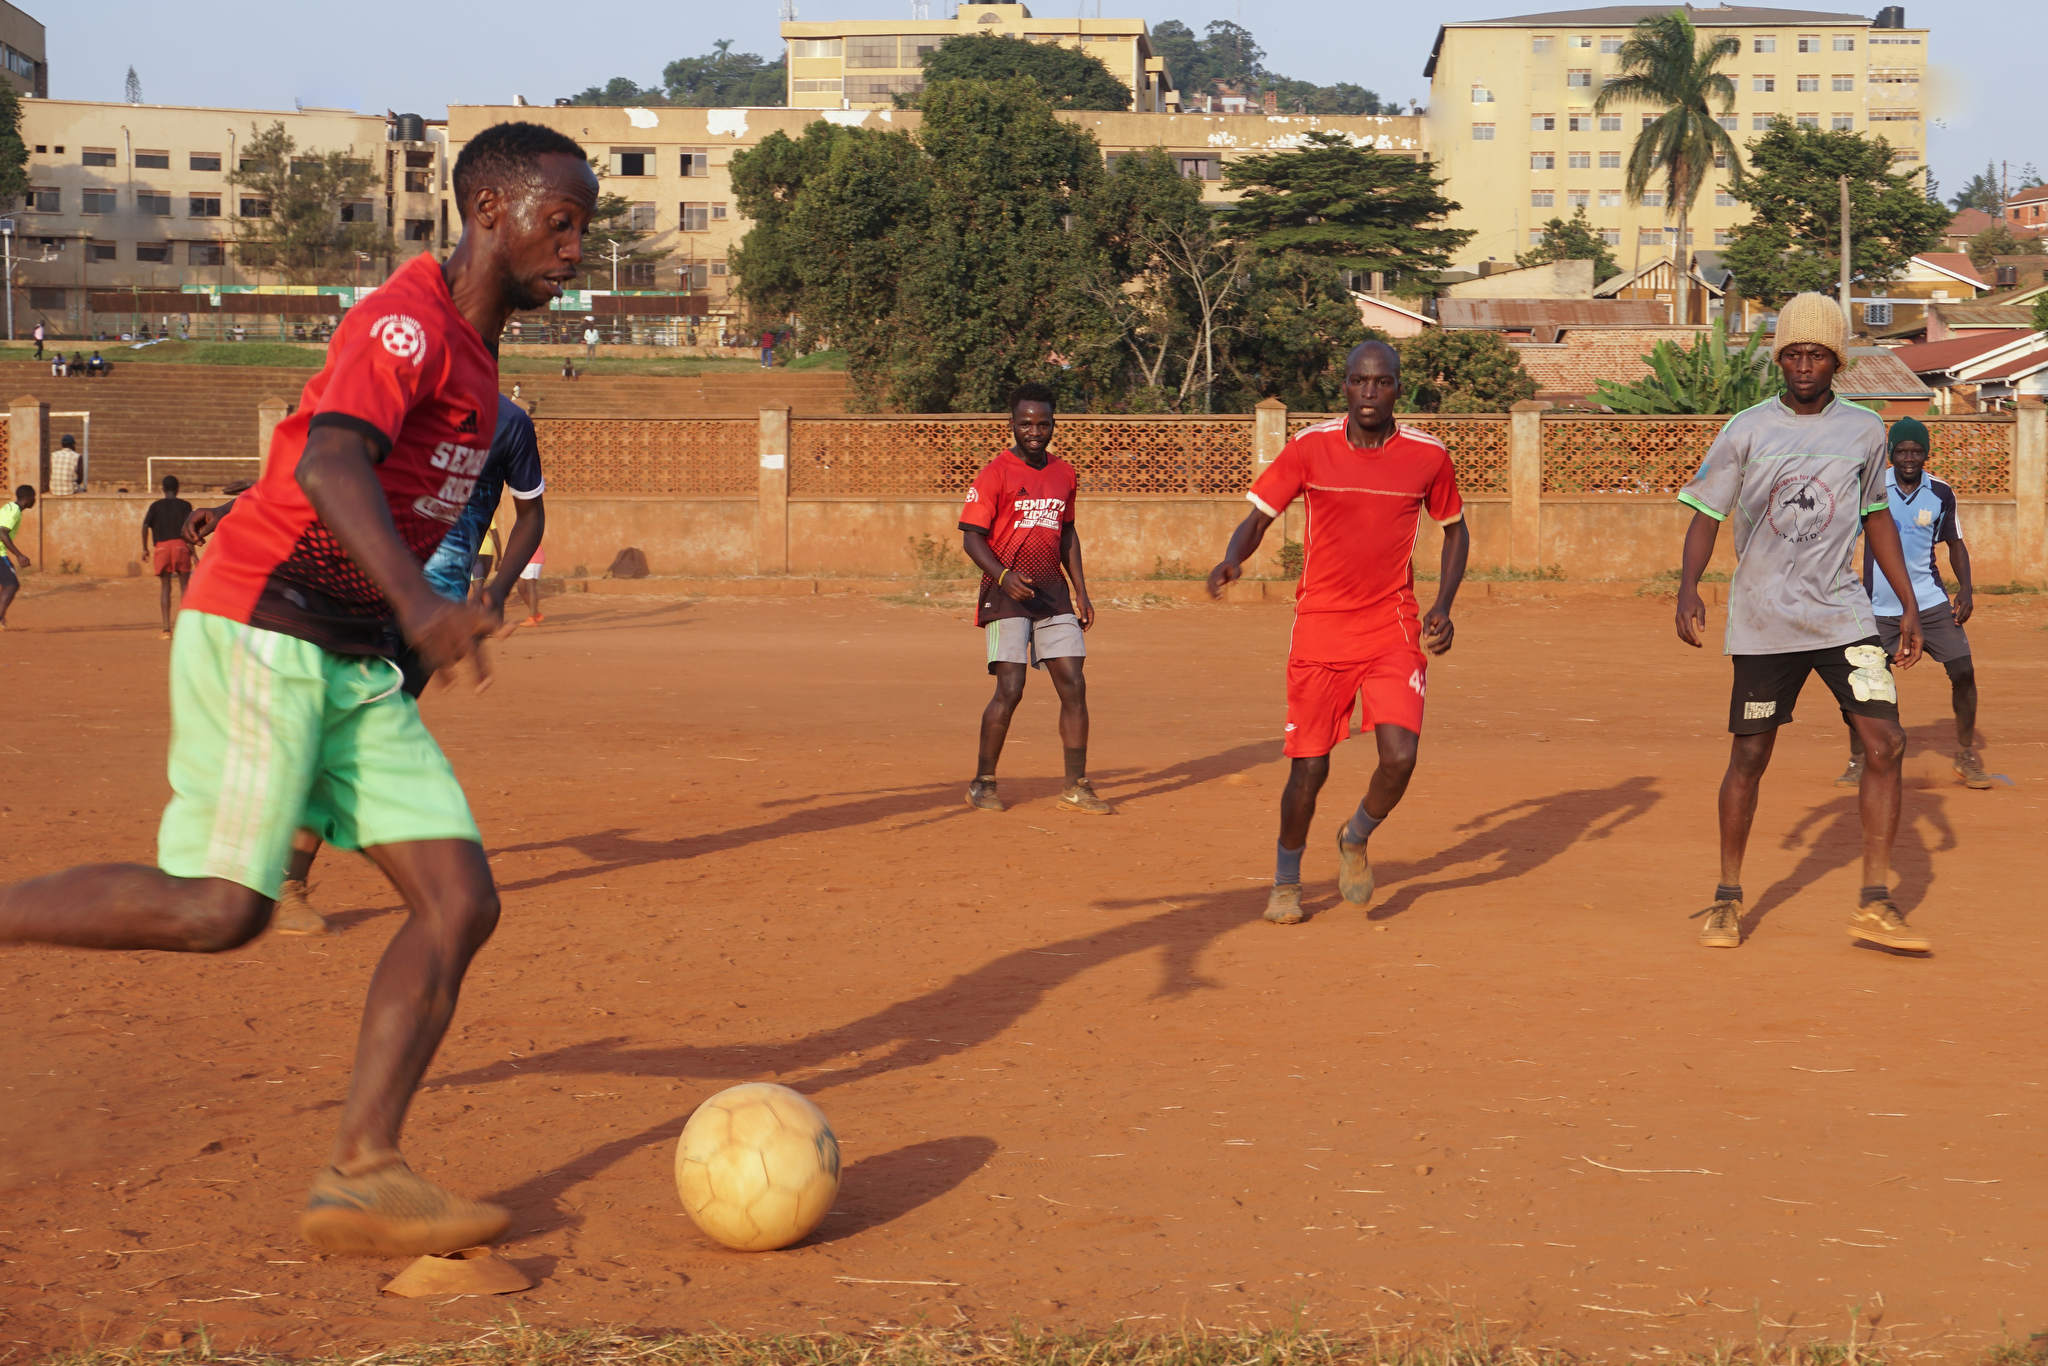 Where Will They Play? Uganda’s Capital Struggles to Retain Increasingly Rare Open Spaces